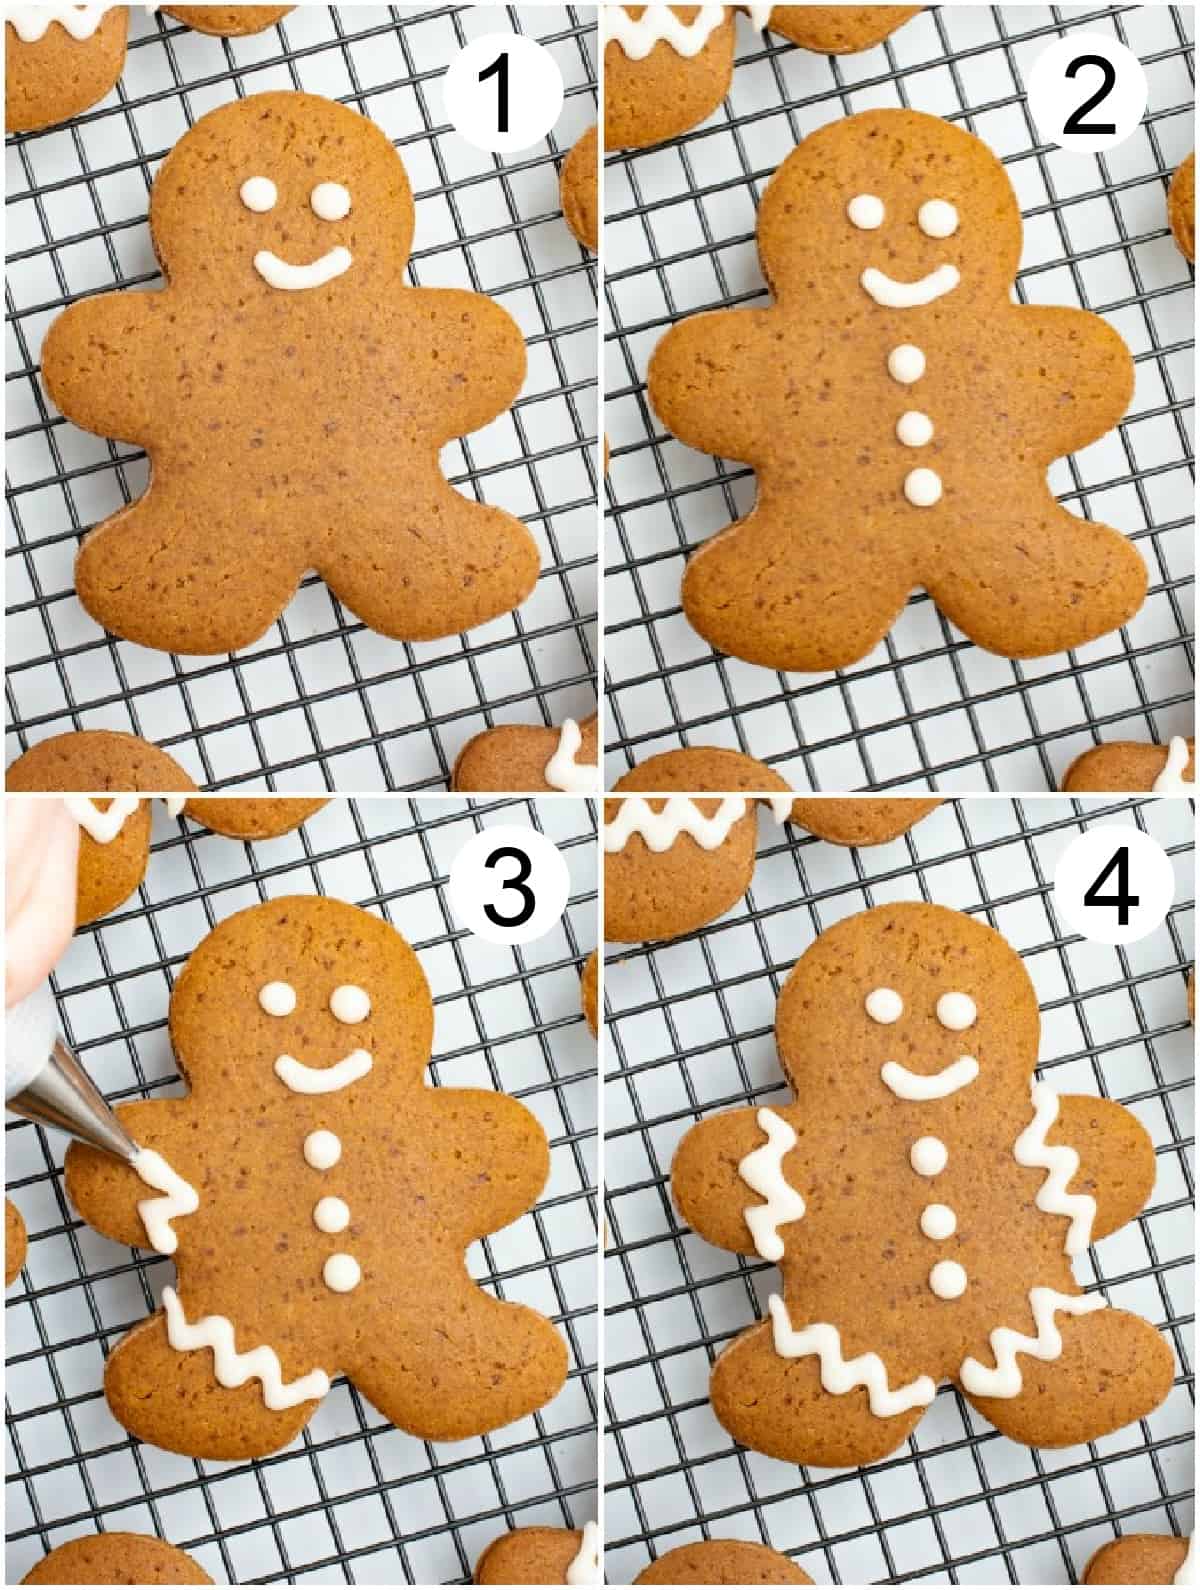 Process of decorating gingerbread cookies.